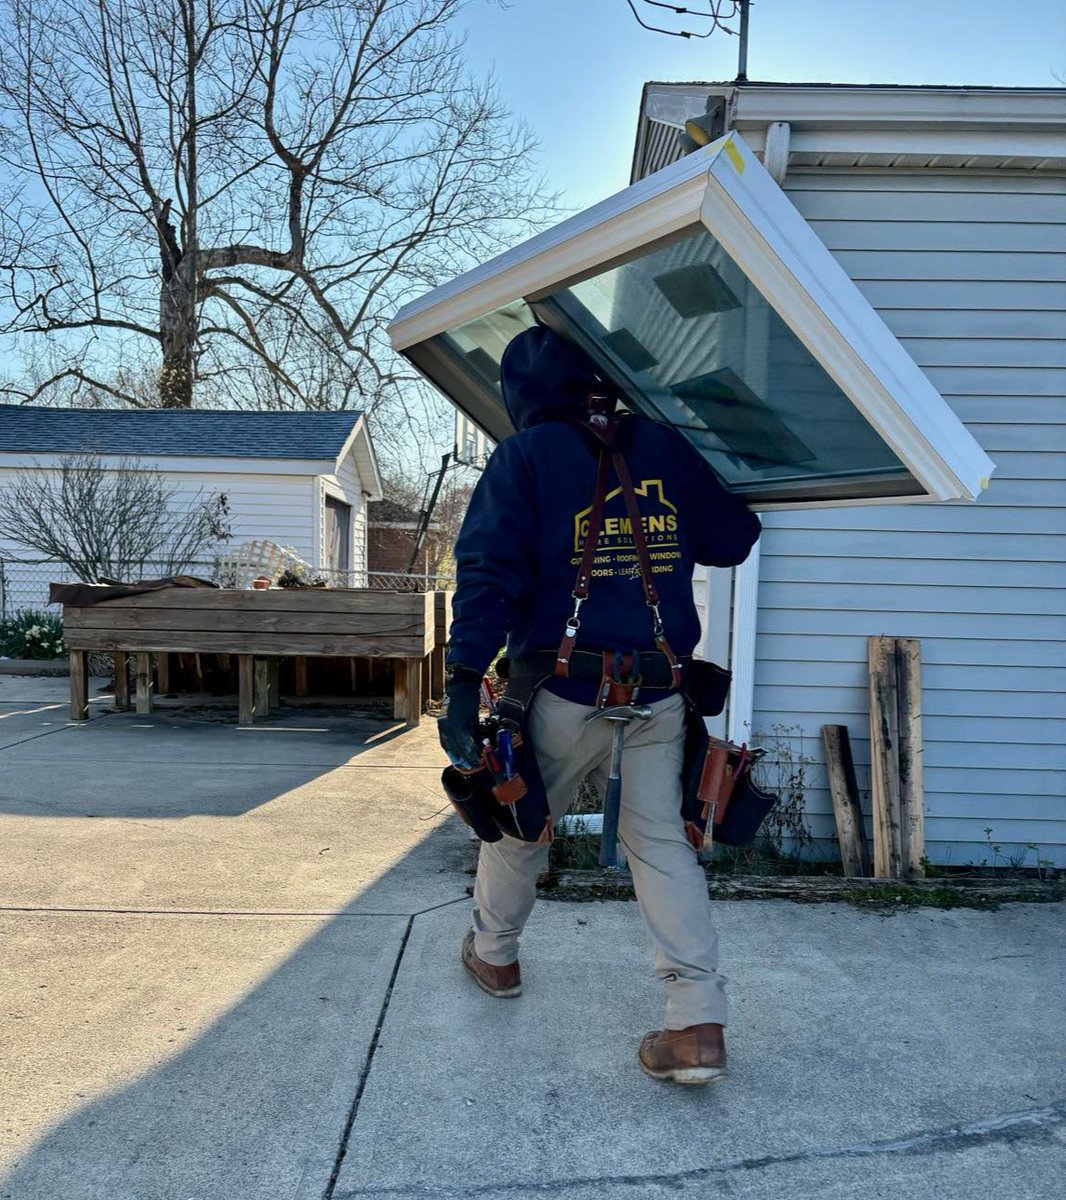 Just our installation crew doing what they do best... The guys had a big window project assigned to them today... Be on the look out to see a video of the crew working together to get this work completed👀
#windowinstallation #newwindows #anderson #indiana